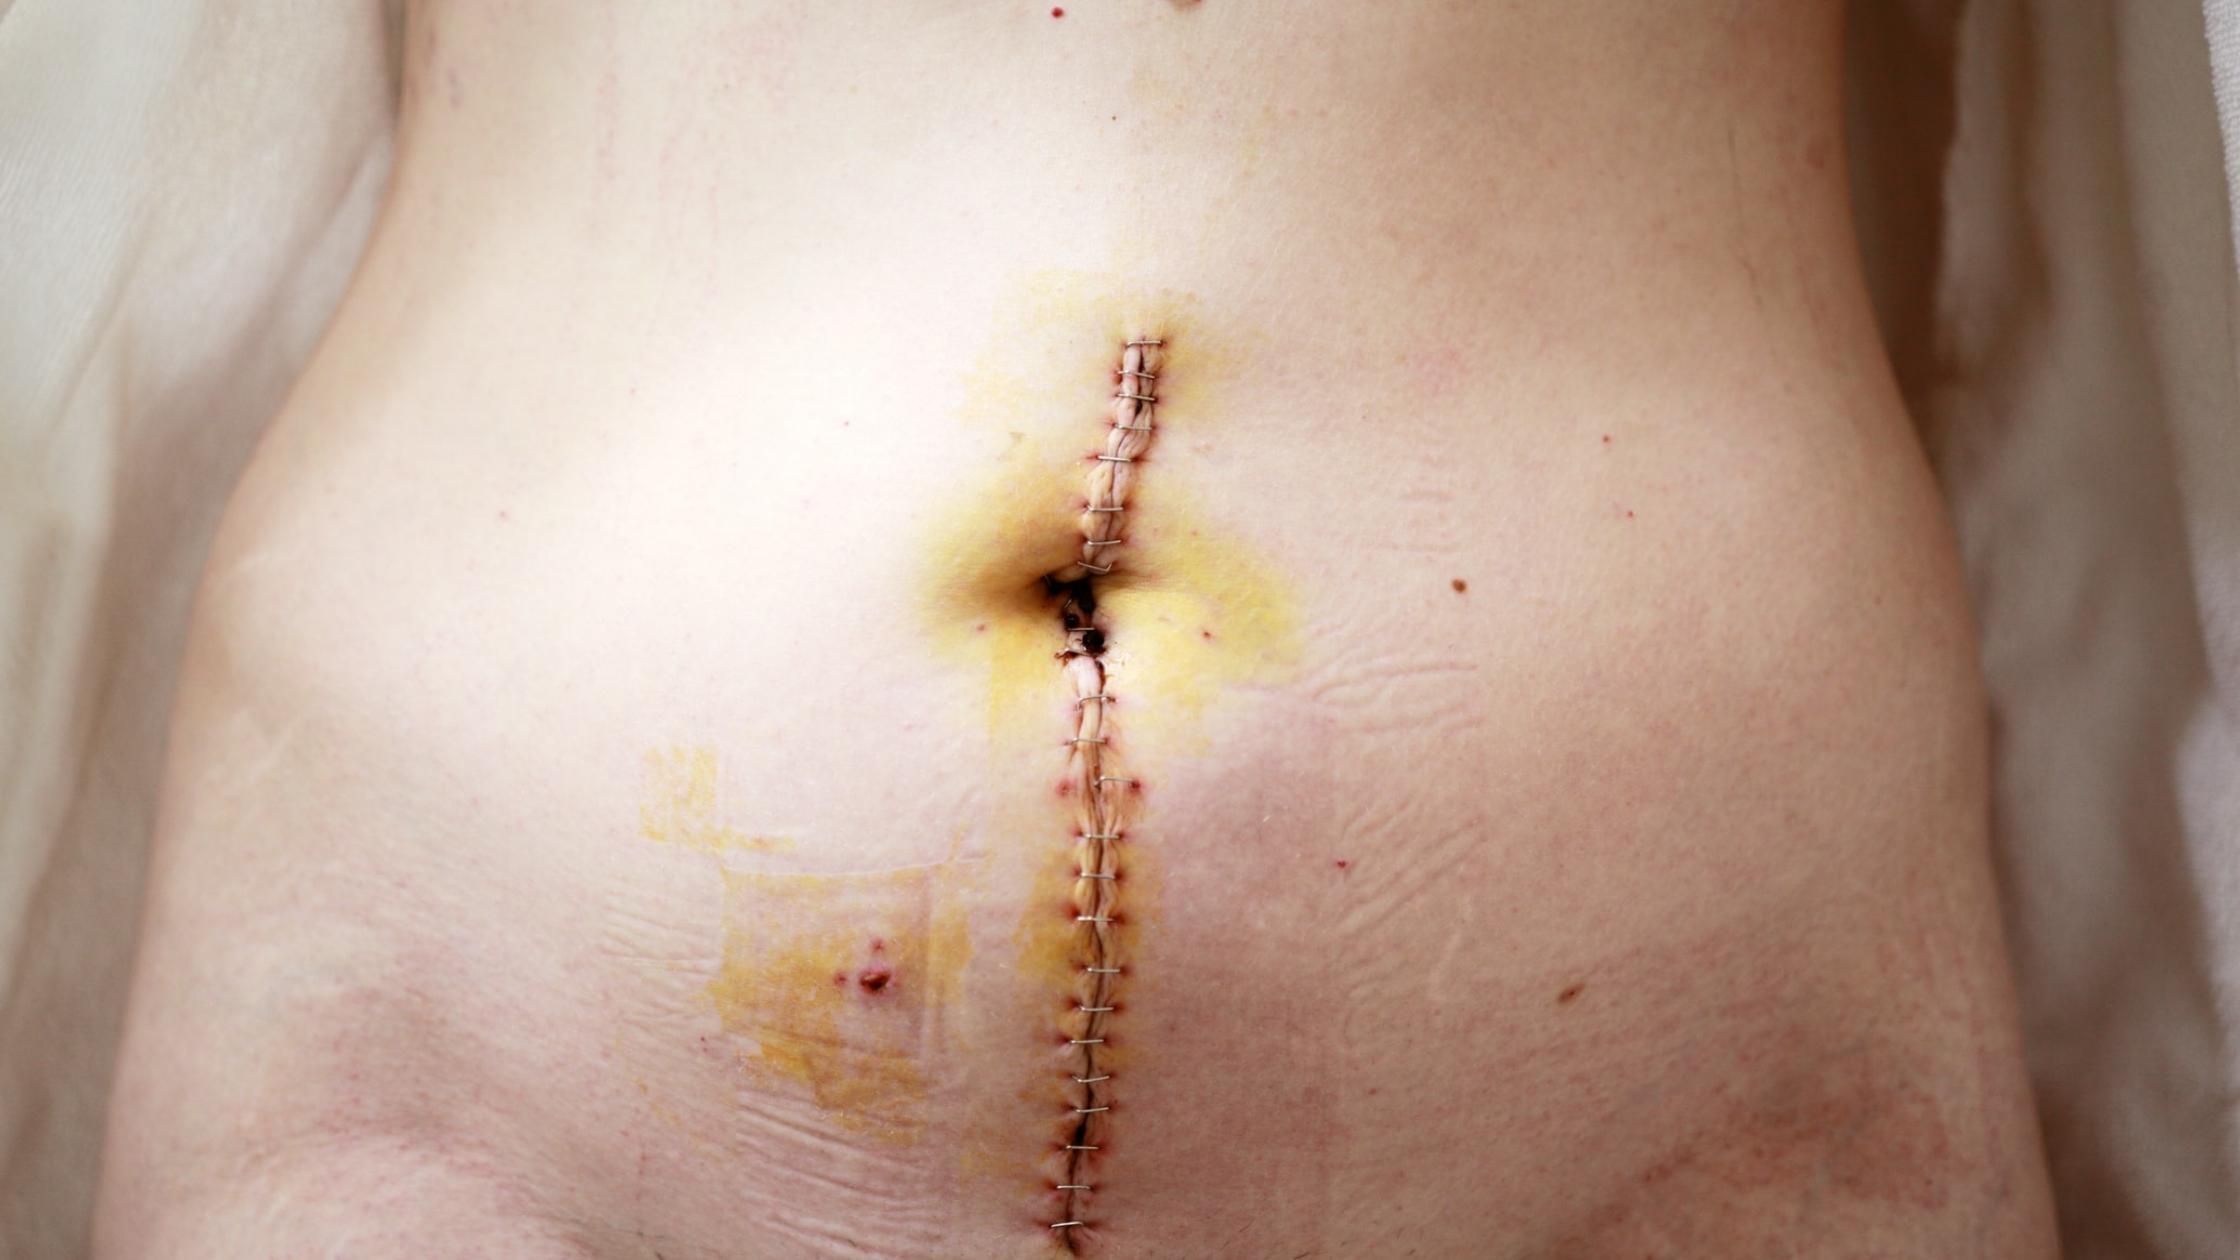 Hysterectomy Scars